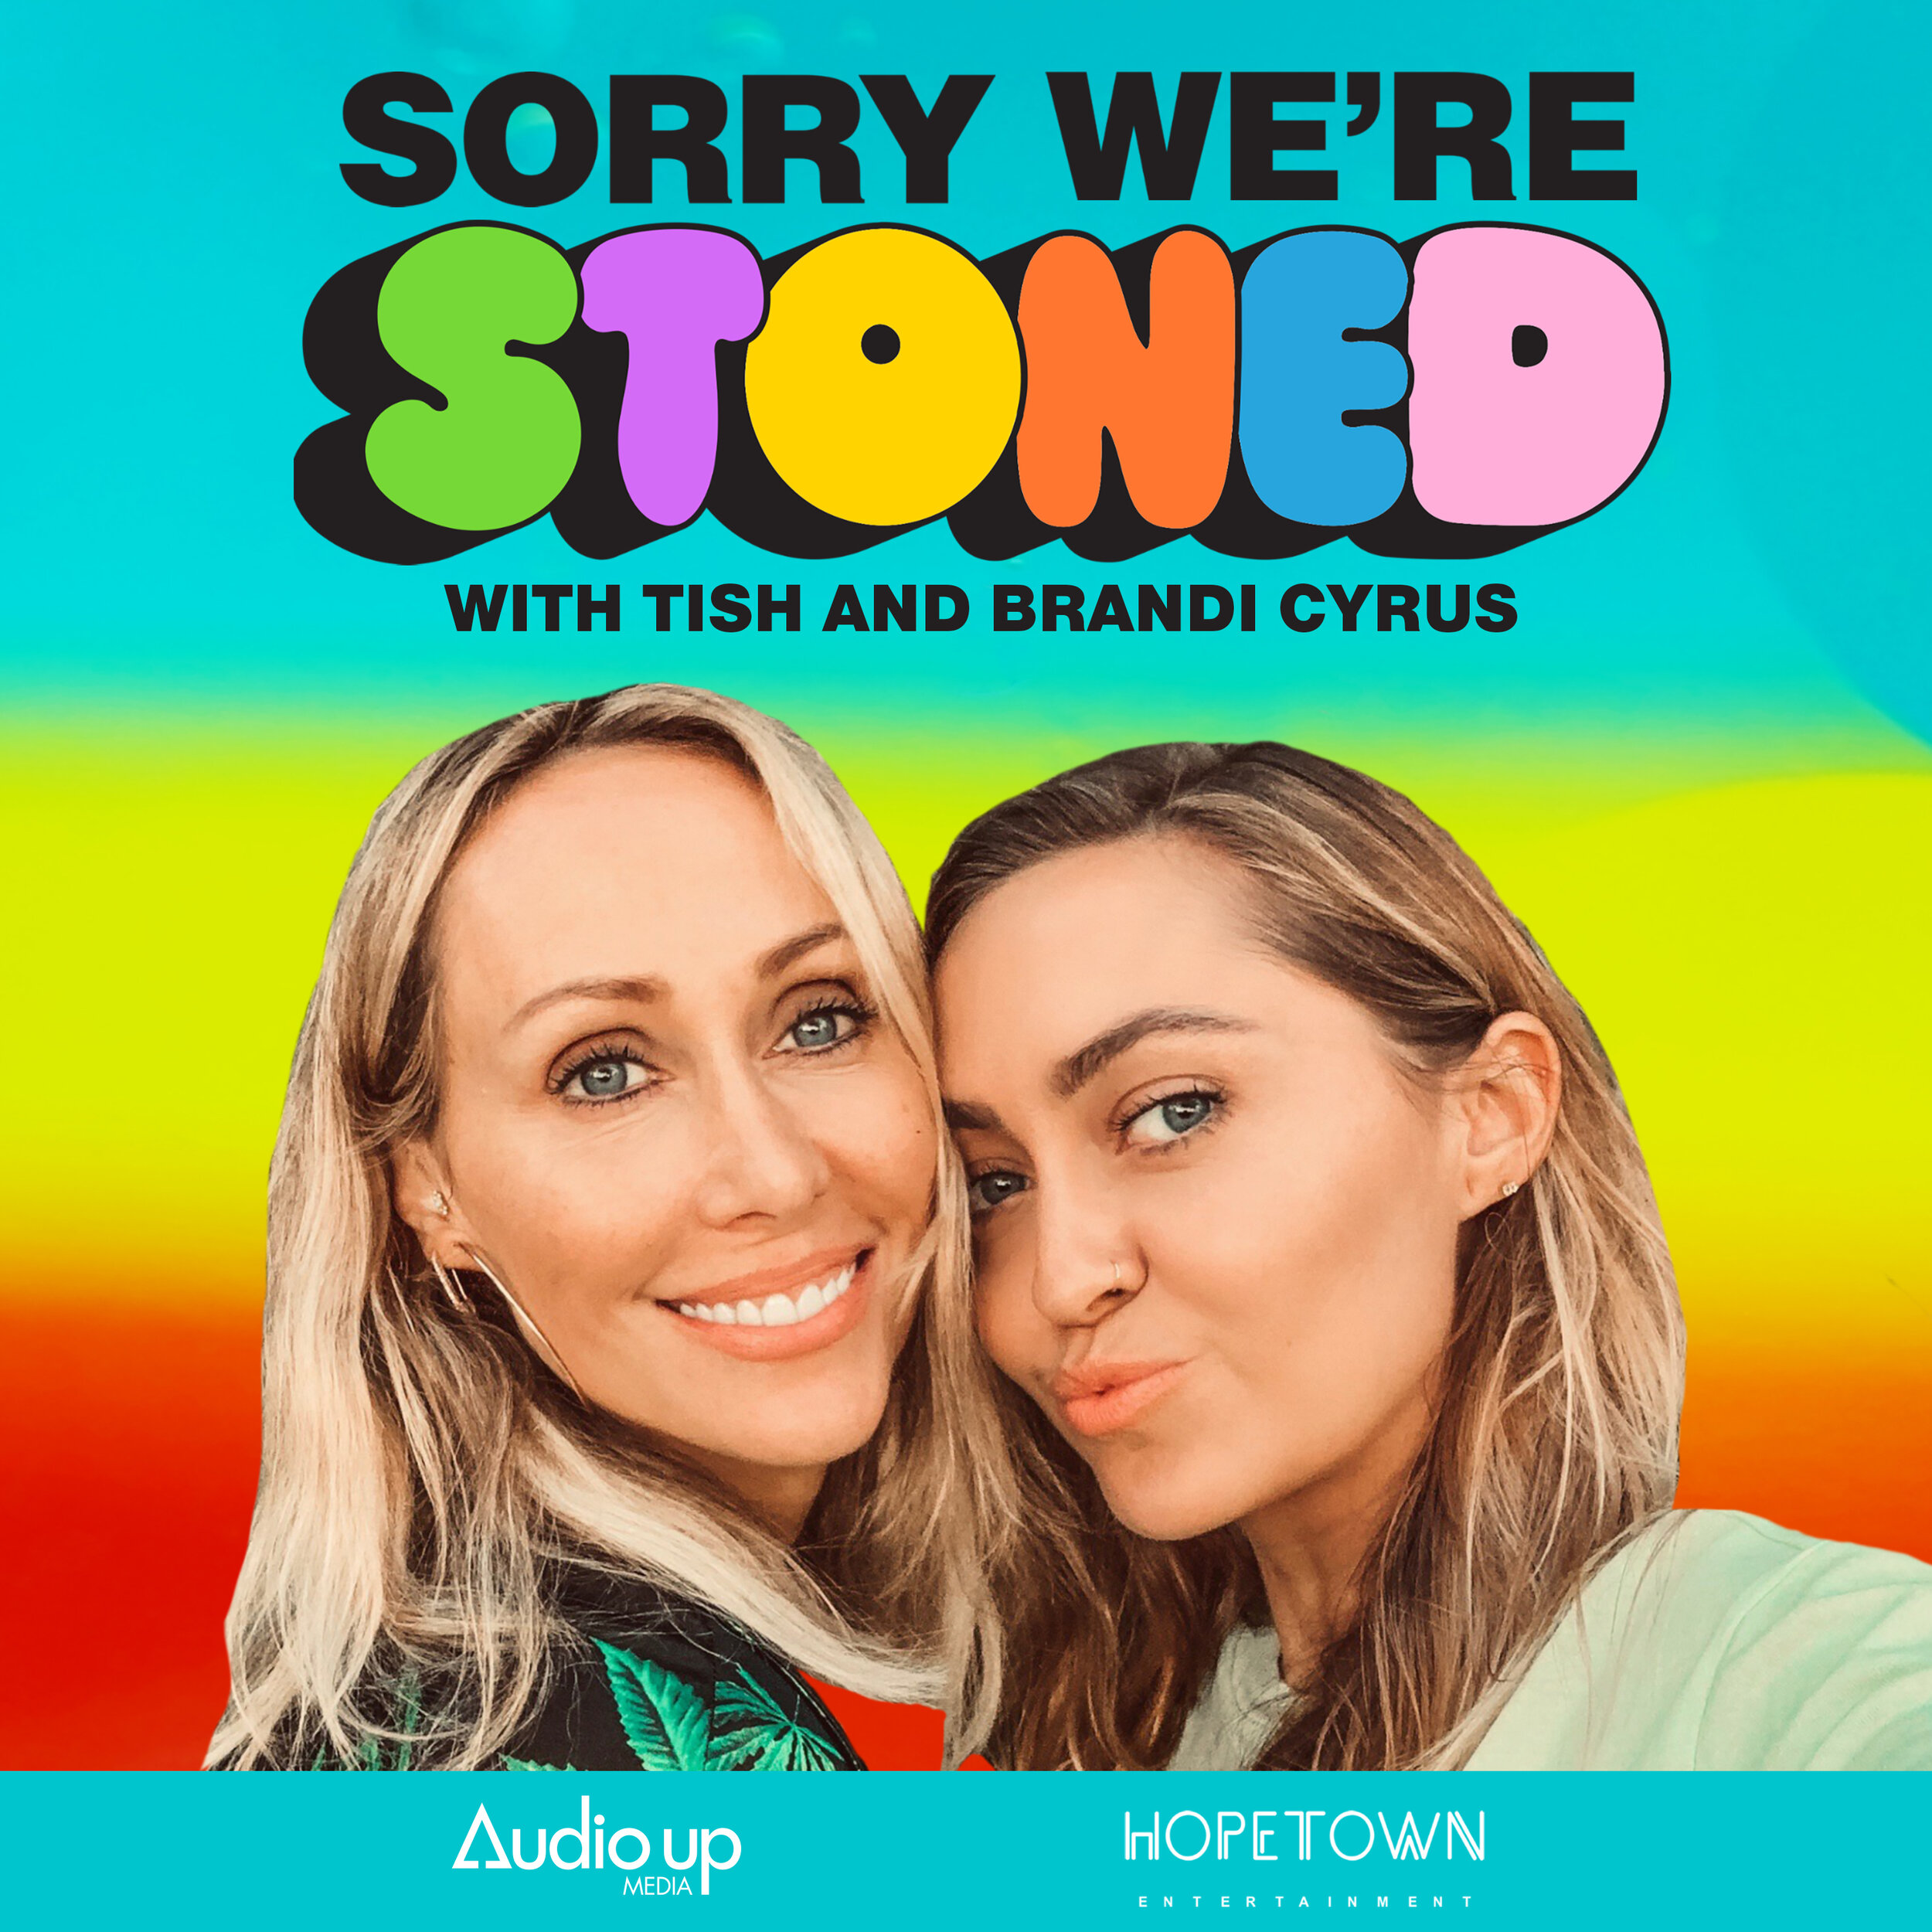 Miley Cyrus Says Touring Isn't “Healthy” For Her – Deadline